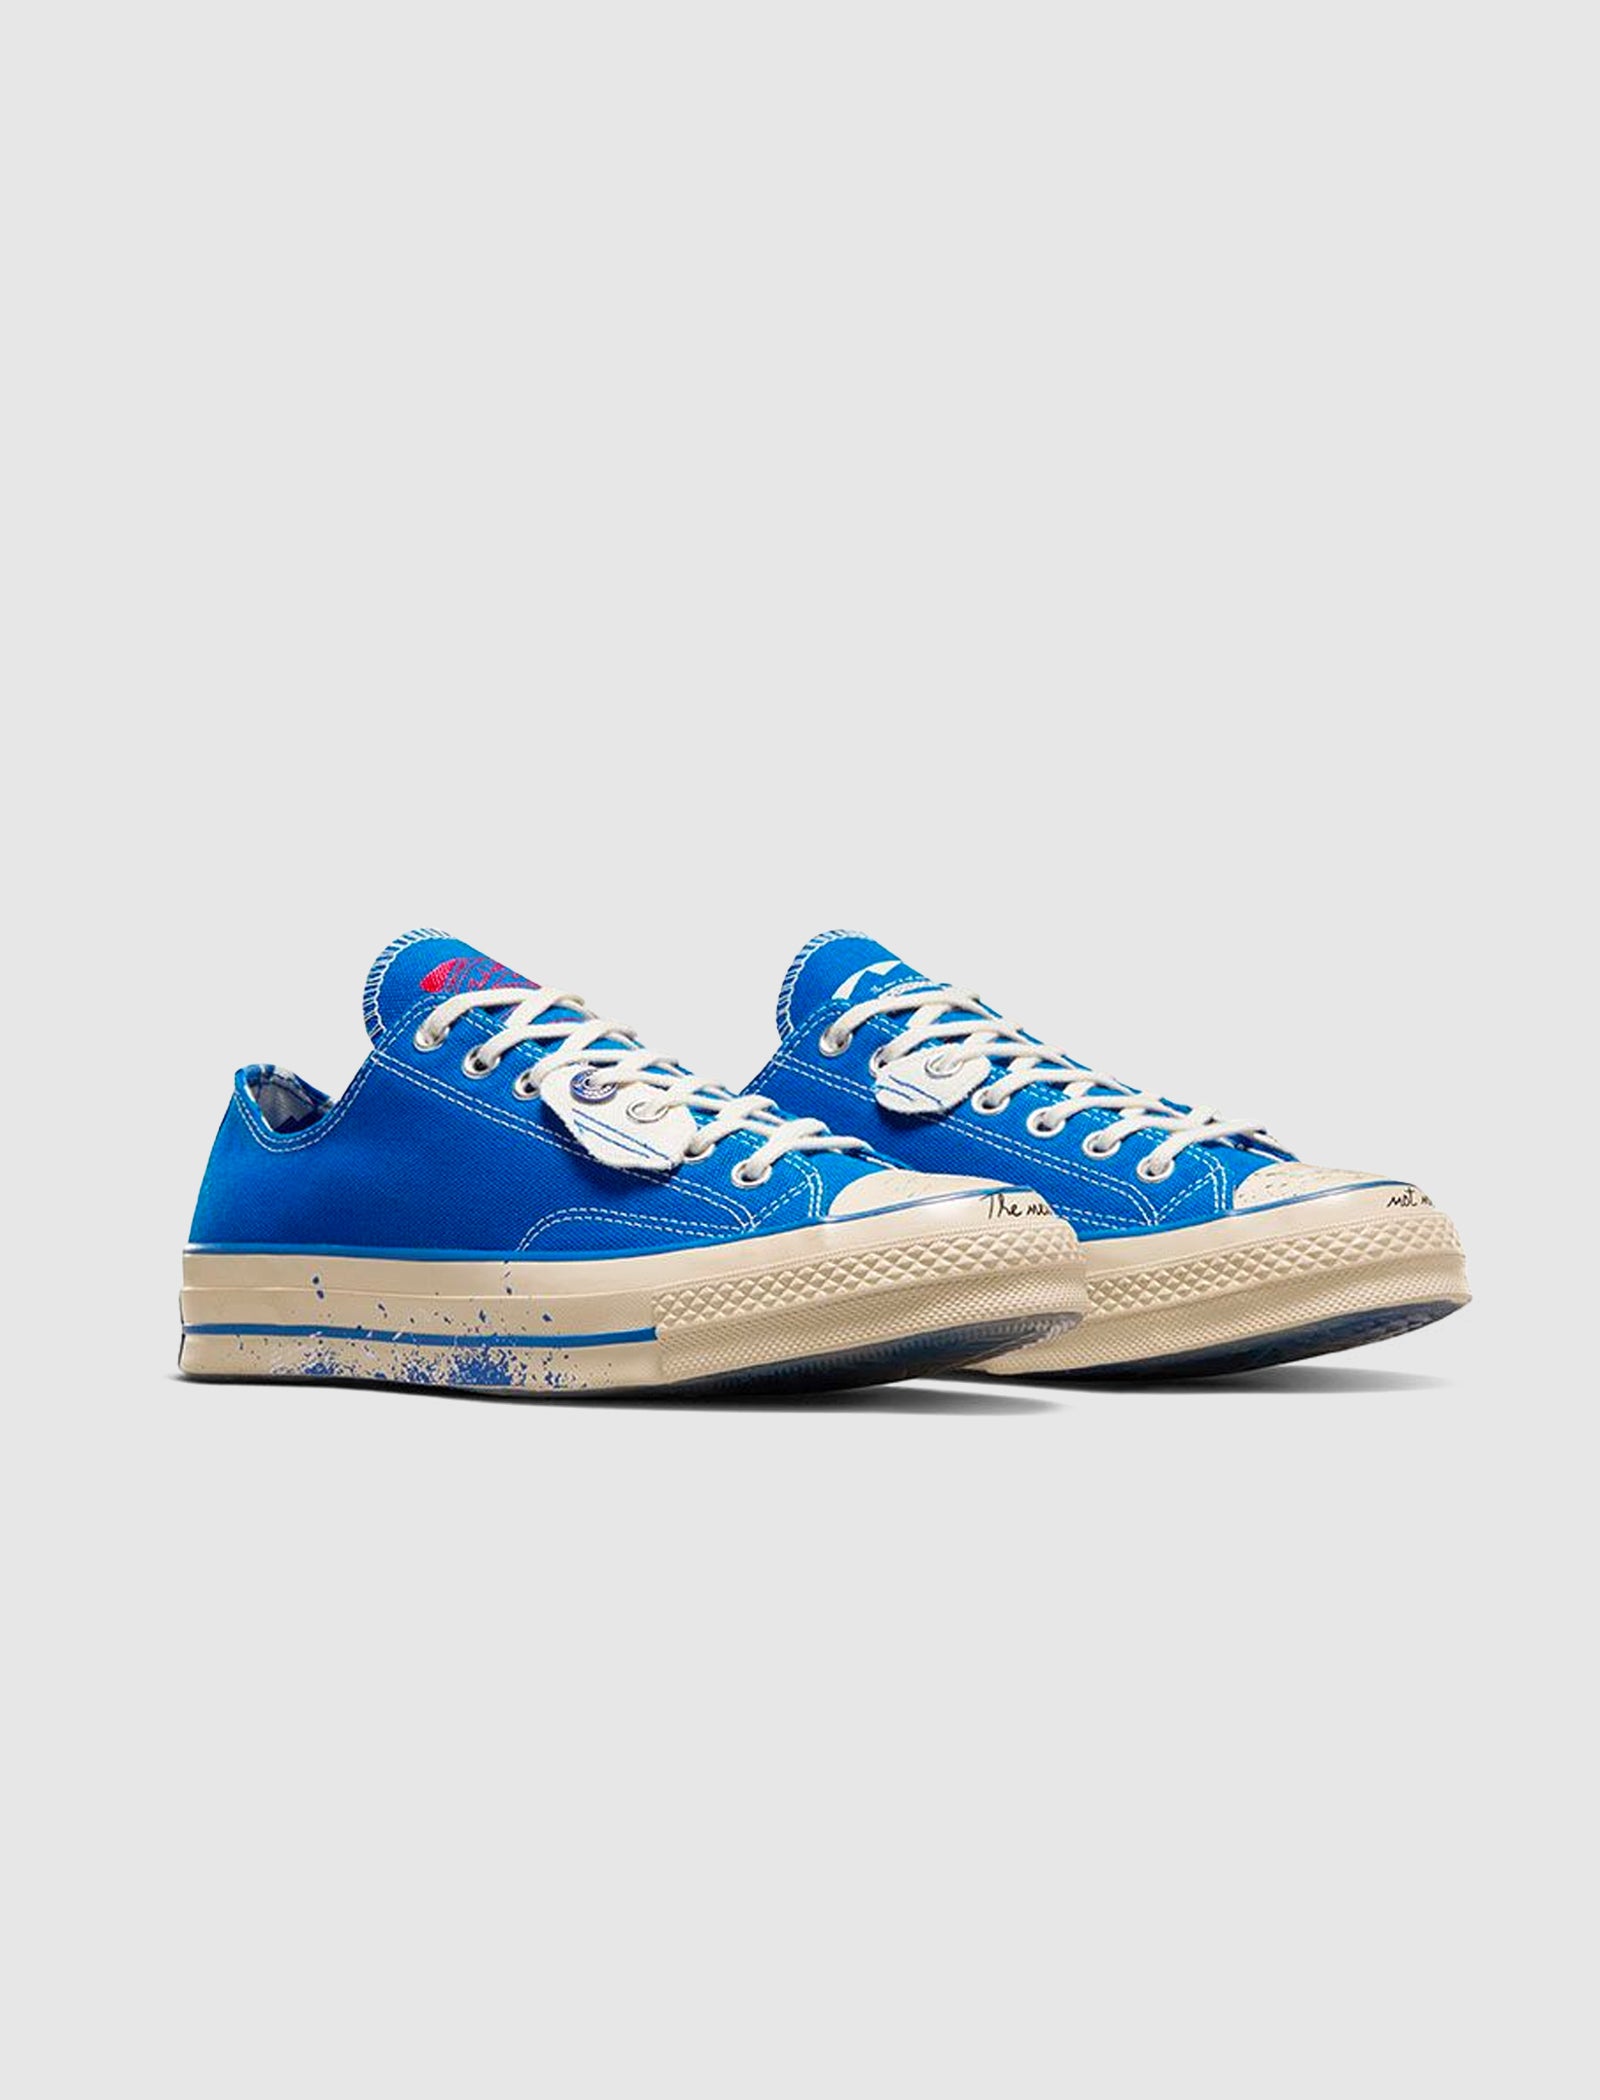 ADER ERROR X CHUCK 70 LOW "IMPERIAL BLUE"